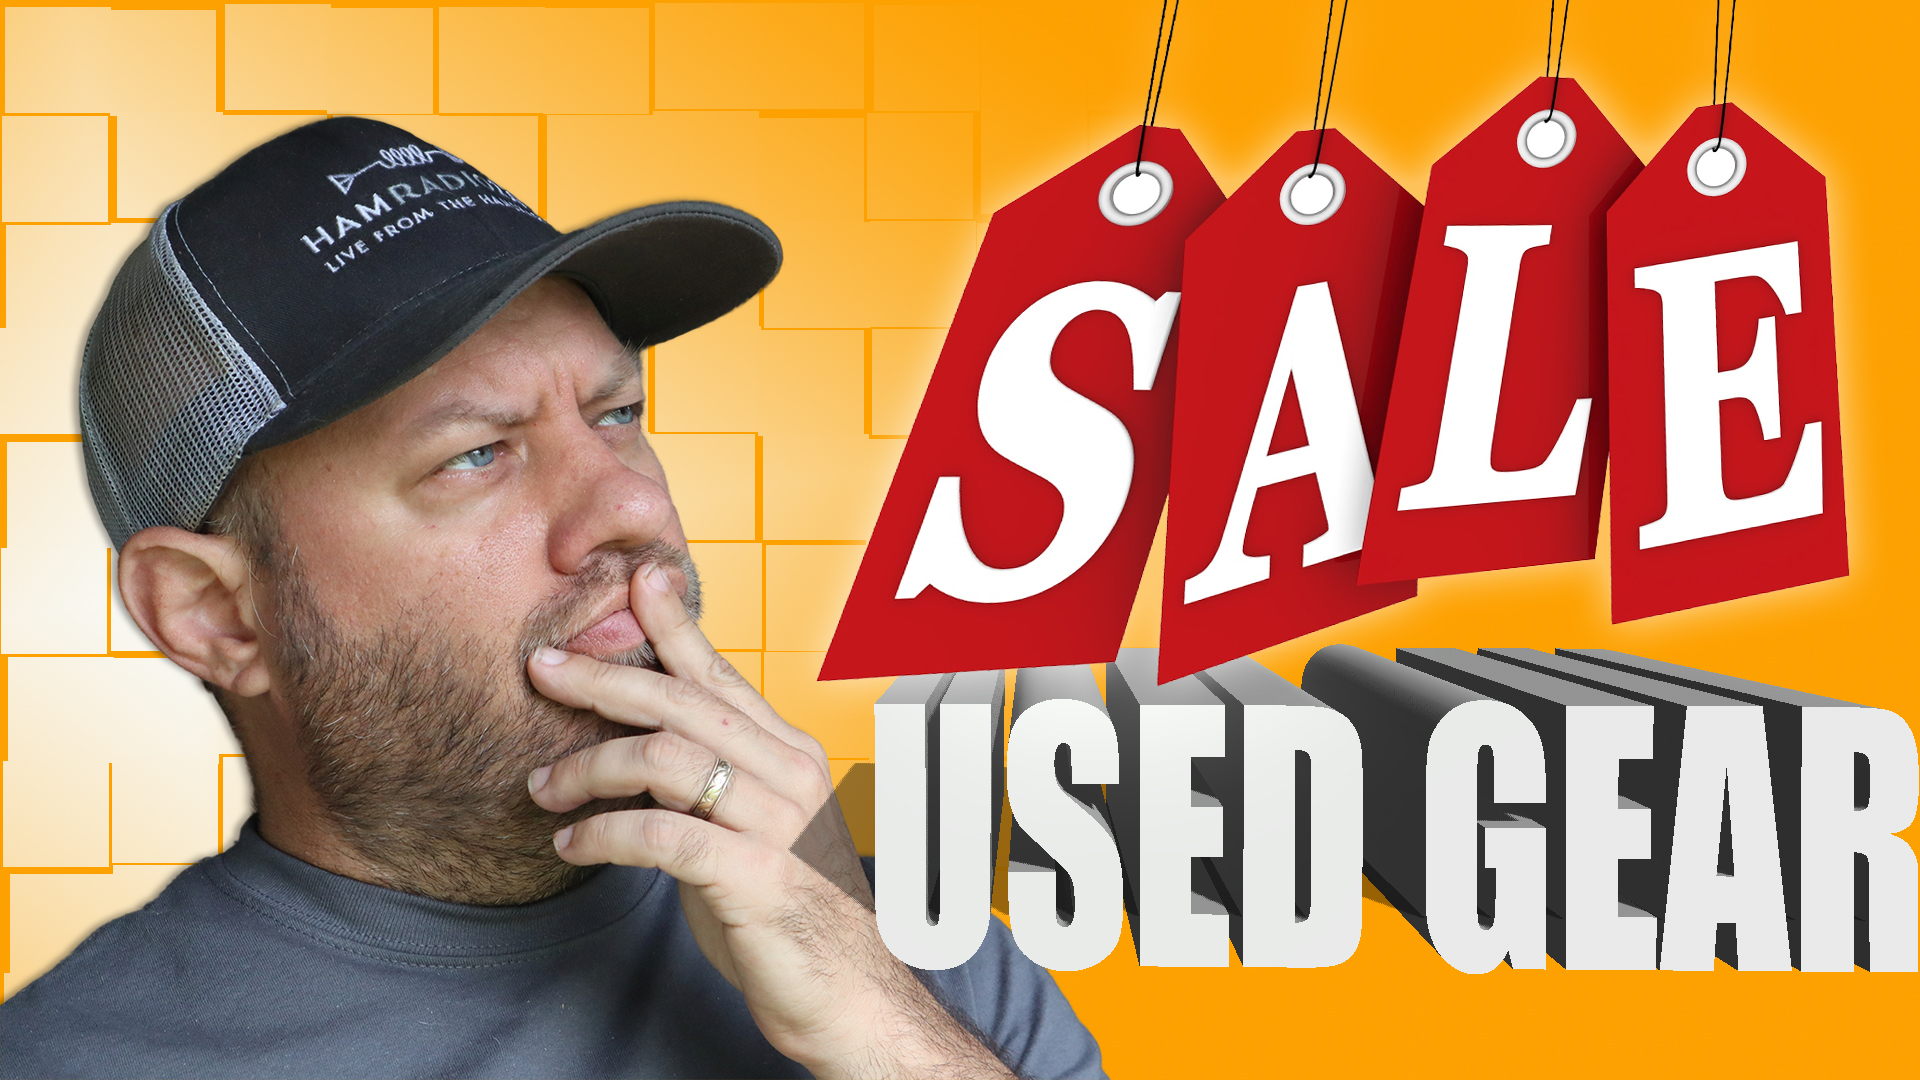 Episode 370: Ham Radio Shopping Deals for USED GEAR May 8th